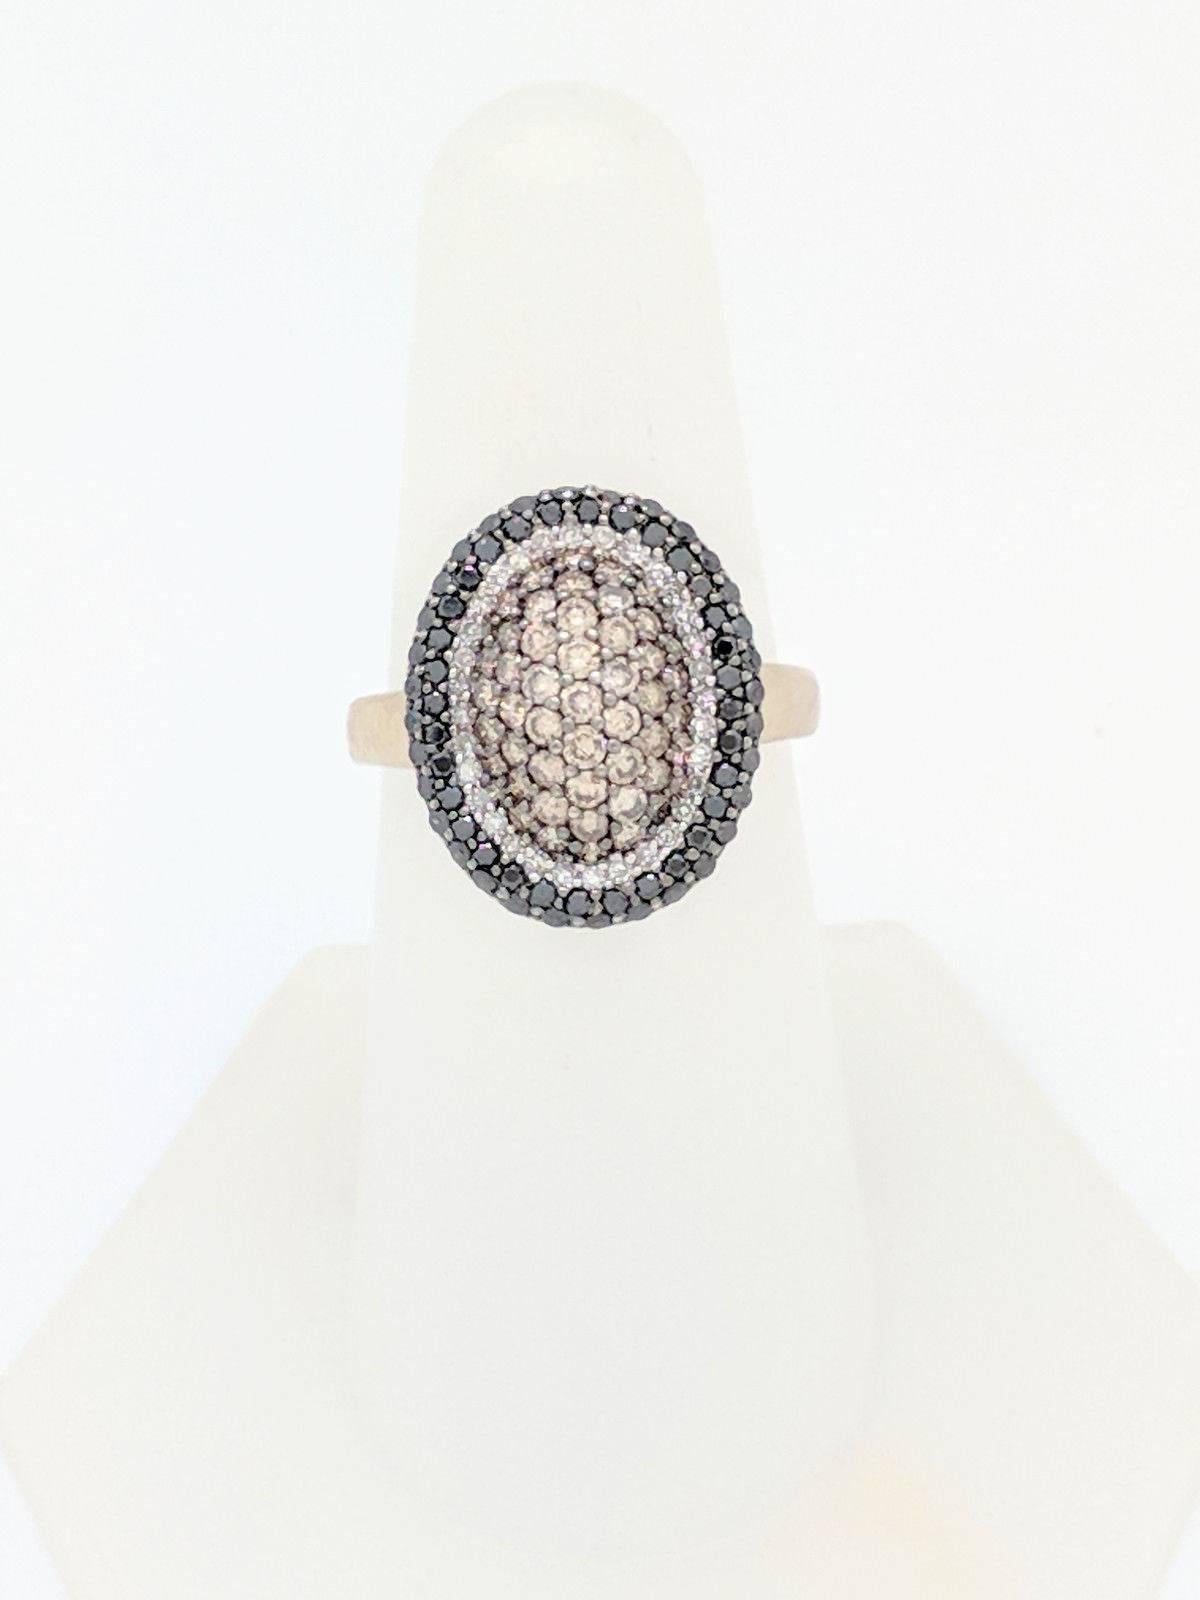 Ladies 14K White Gold 1ctw Pave Set White, Black & Champagne Diamond Ring Size 7

You are viewing a beautiful Champagne, Black & White Diamond Ring. This ring is crafted from 14k white gold and weigh 5.9 grams. This ring features (64) round natural